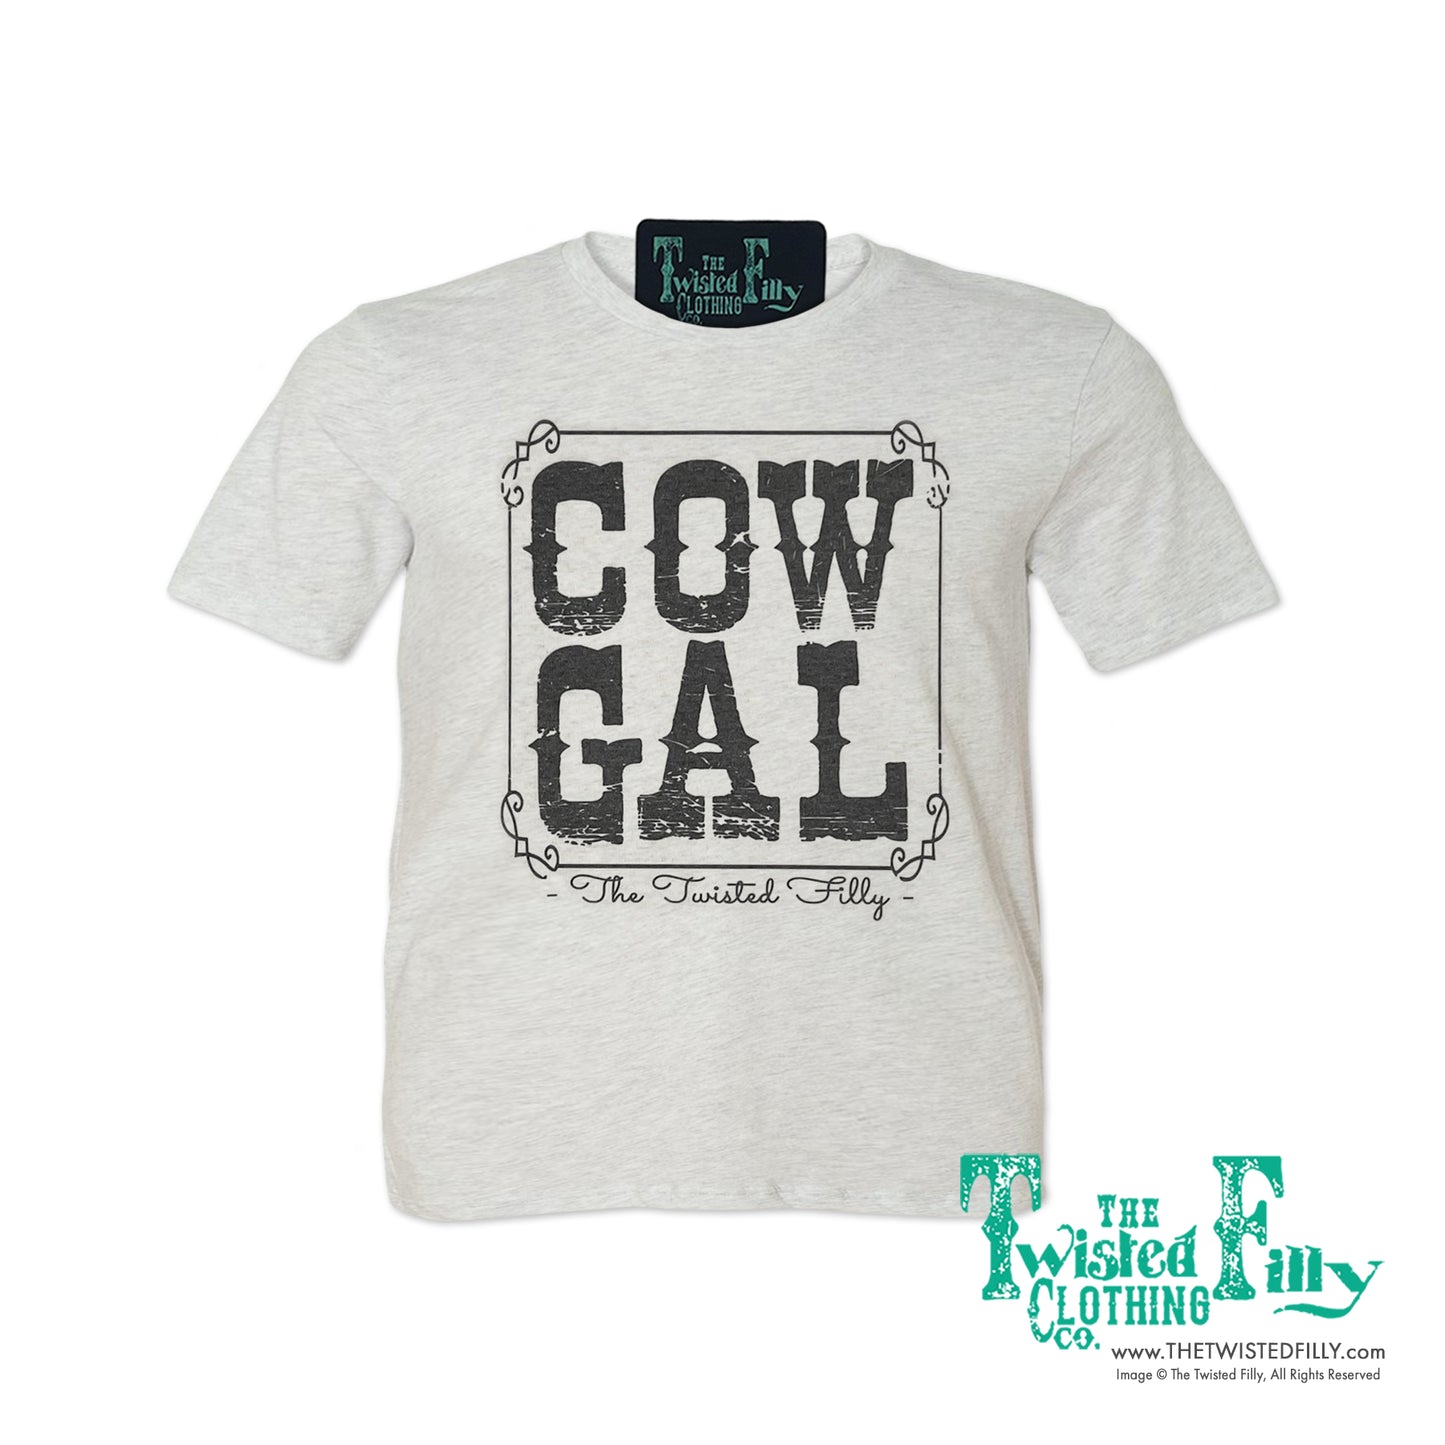 Cow Gal - S/S Youth Tee - Assorted Colors